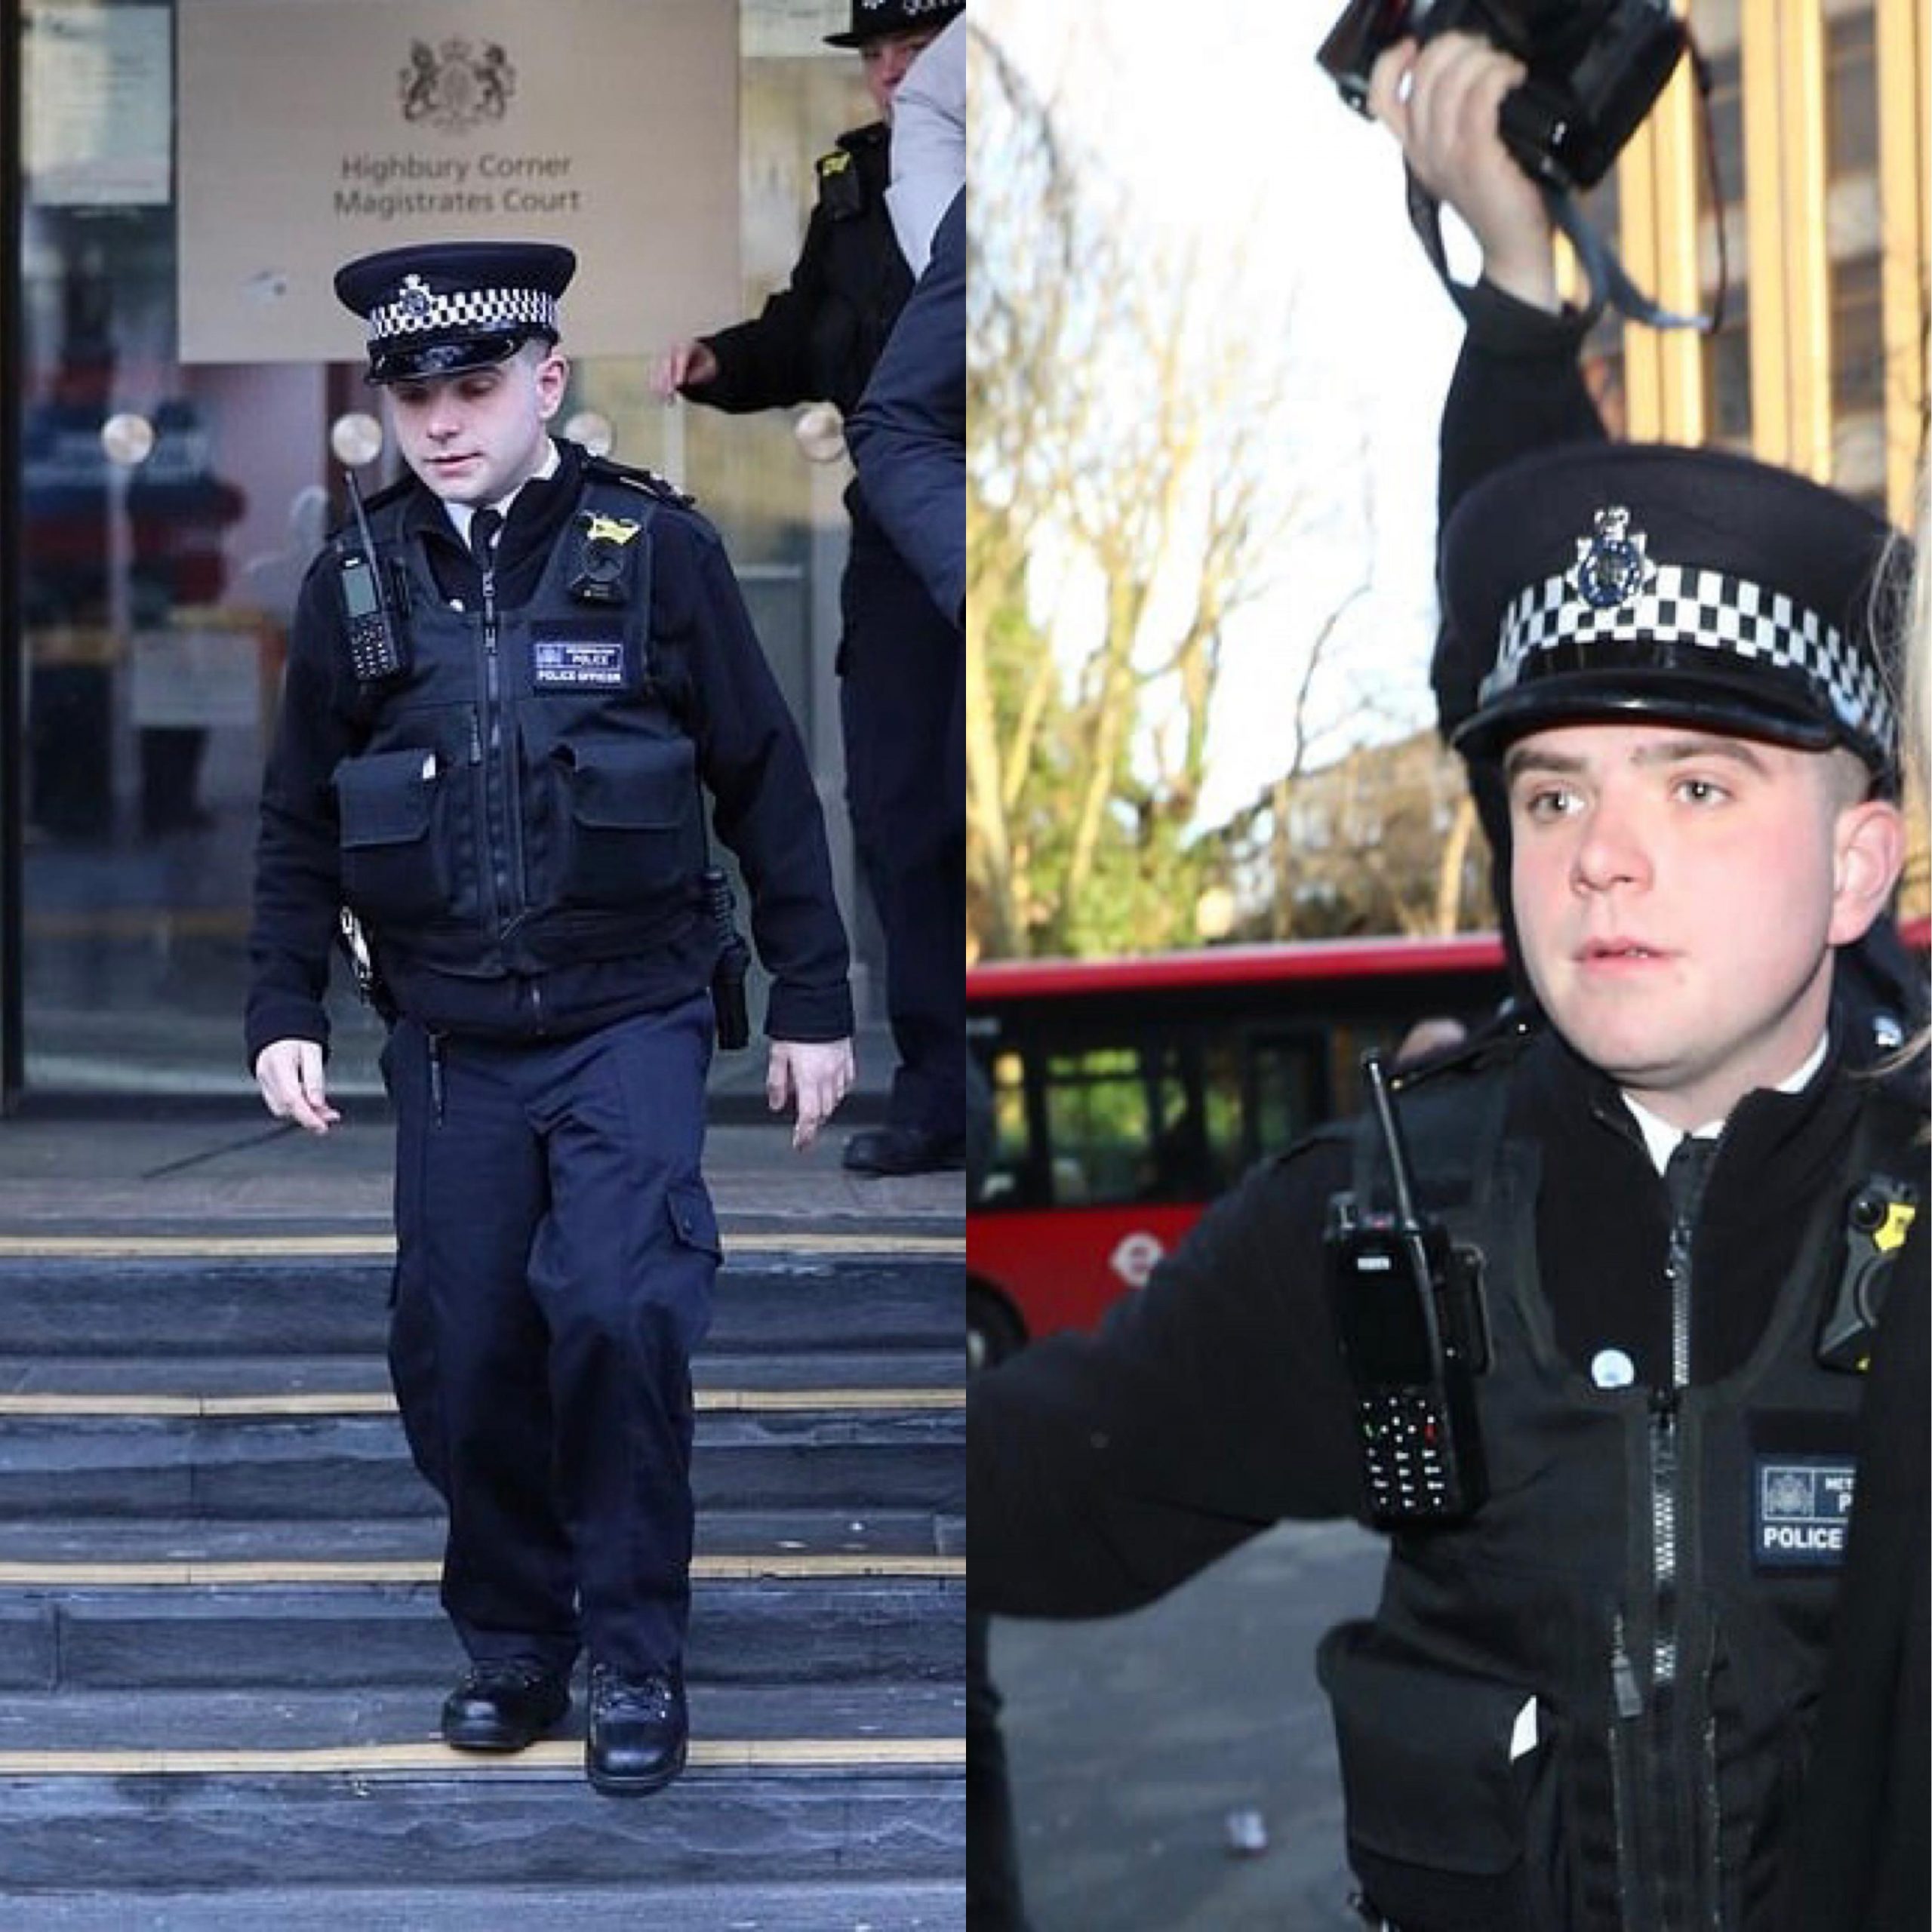 This British police officer. : 13or30